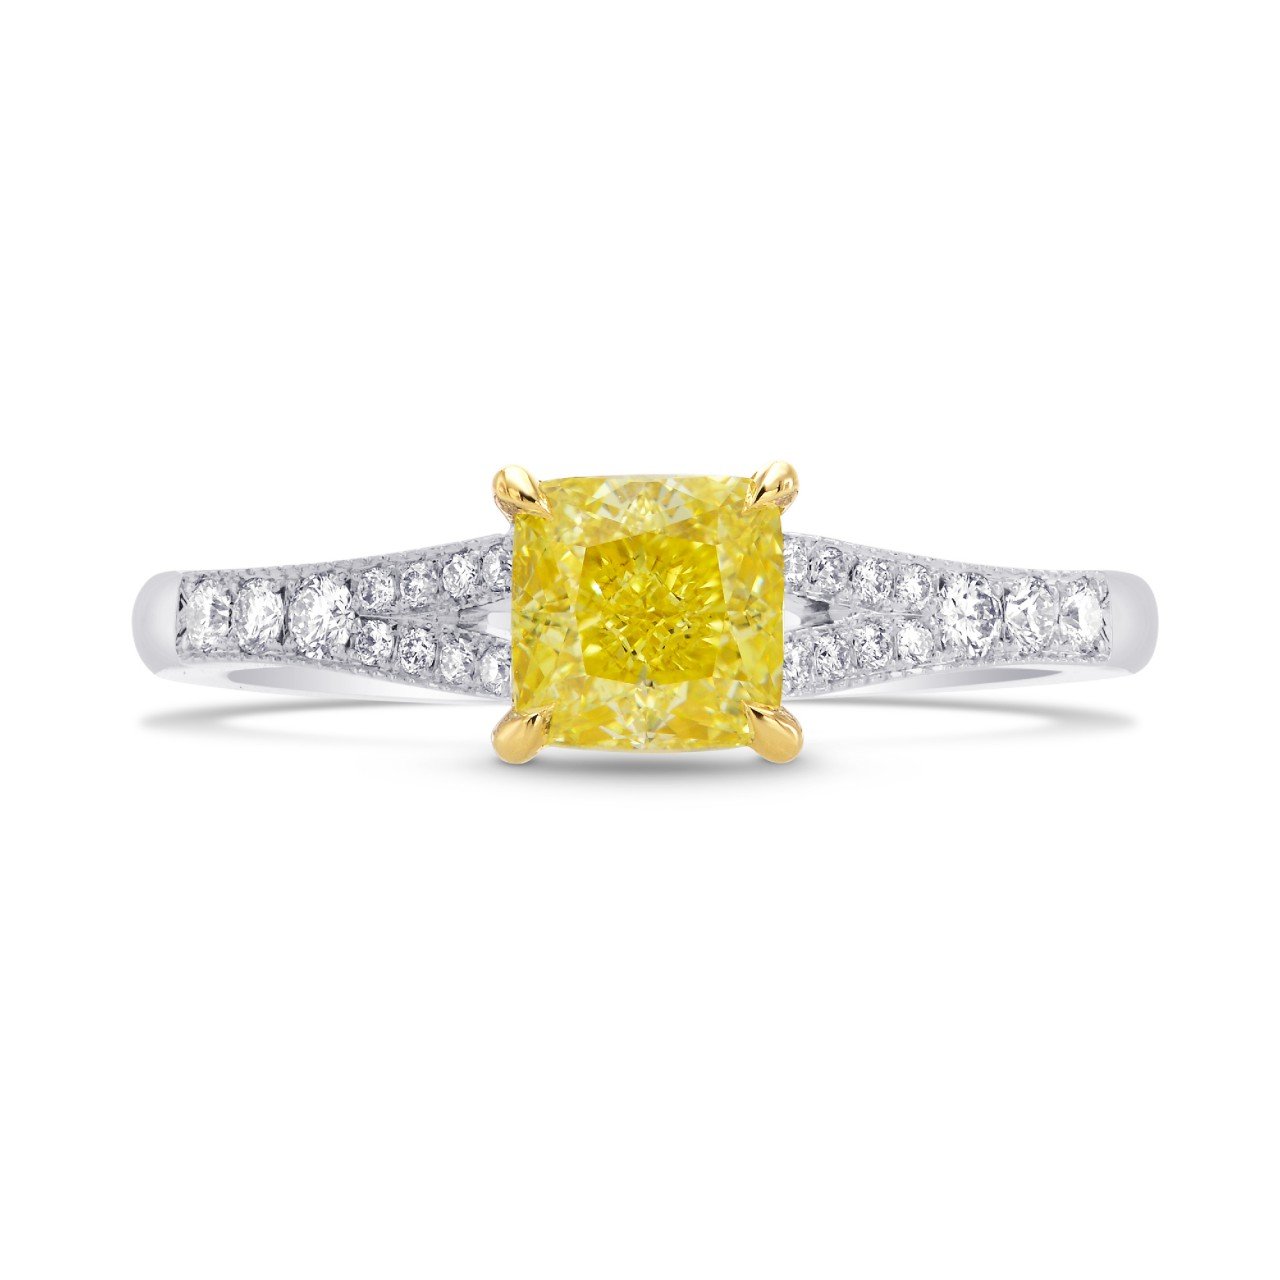 Leibish & co 1.18Cts Yellow Diamond Engagement Side Stone Ring Set in 18K White Yellow Gold Engagement Natural Loose Stone Gift For Her Anniversary Real Wedding Birthday